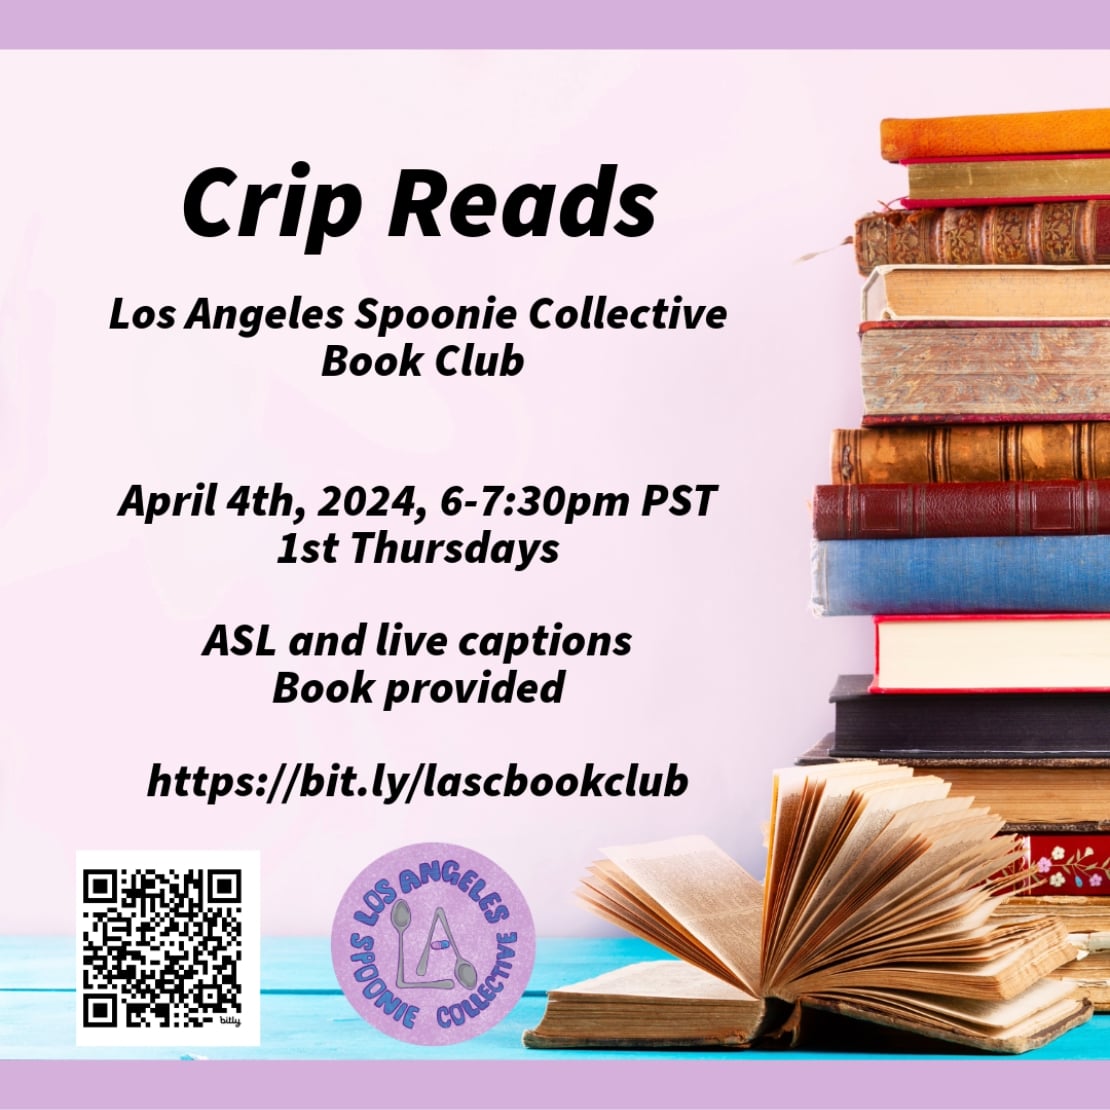 In April we will be discussing Care Work: Dreaming Disability Justice, a book by Leah Lakshmi Piepzna-Samarasinha.

#LASC #LASpoonieCollective #DisabilityBookClub #CripReads #BookClub #disability #DisabilityEvent